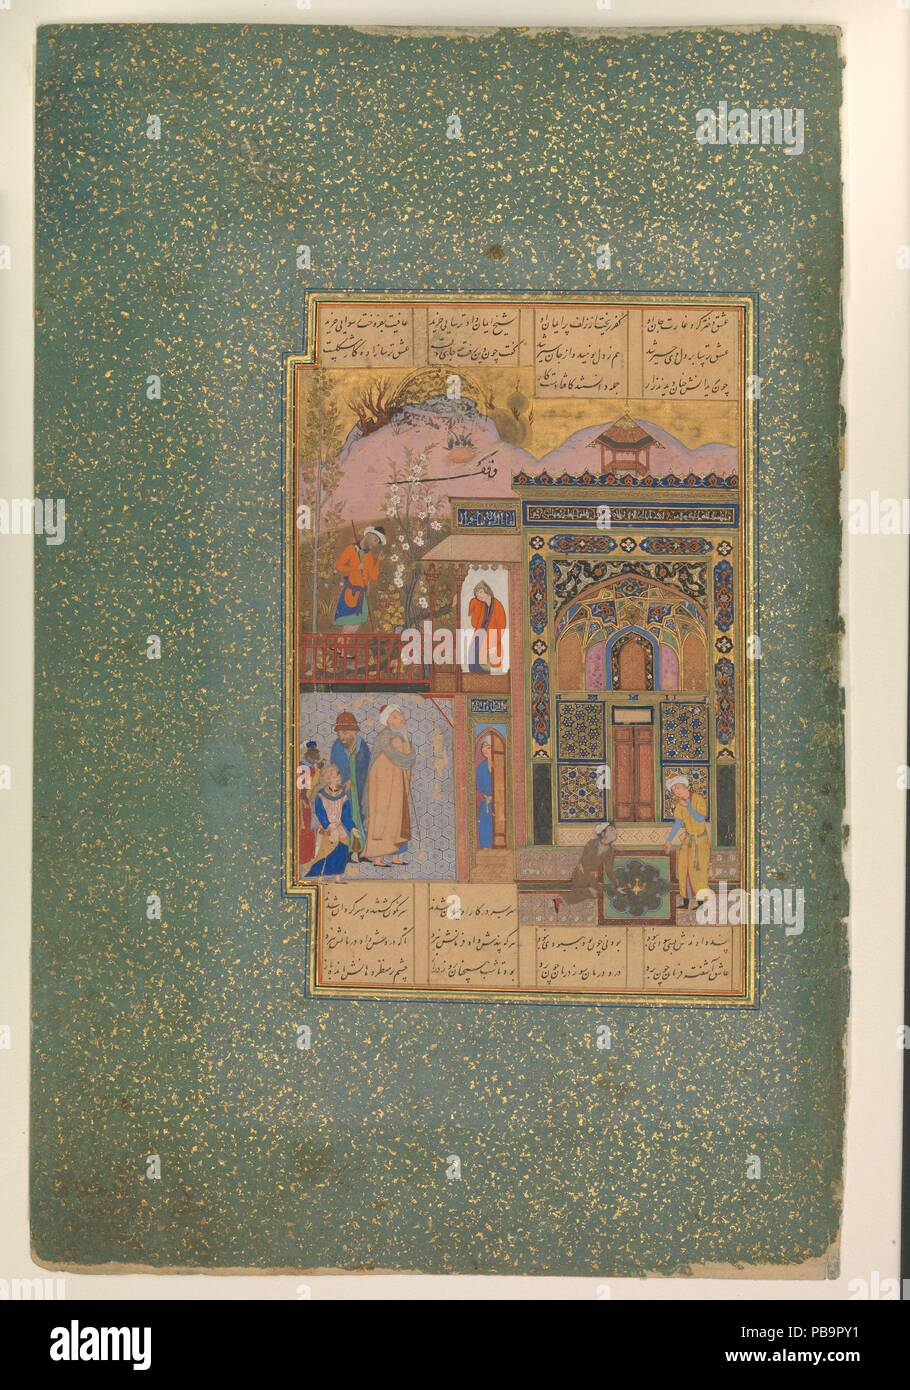 'Shaikh San'an beneath the Window of the Christian Maiden', Folio18r  from a Mantiq al-tair (Language of the Birds). Author: Farid al-Din `Attar (ca. 1142-1220). Calligrapher: Sultan `Ali Mashhadi (ca.1440-1520). Dimensions: Painting: H. 2 7/8 in. (7.4 cm)   W. 4 1/2 in. (11.4 cm)  Page: H. 13 in. (33 cm)   W. 8 1/2 in. (21.6 cm)  Mat: H. 19 1/4 in. (48.9 cm)   W. 14 1/4 in. (36.2 cm). Date: ca. 1600.  This Safavid illustration depicts a scene from a famous story of Shaikh San'an that is often illustrated in other manuscripts of the Mantiq al-Tayr. The story is as follows: A celebrated shaikh  Stock Photo